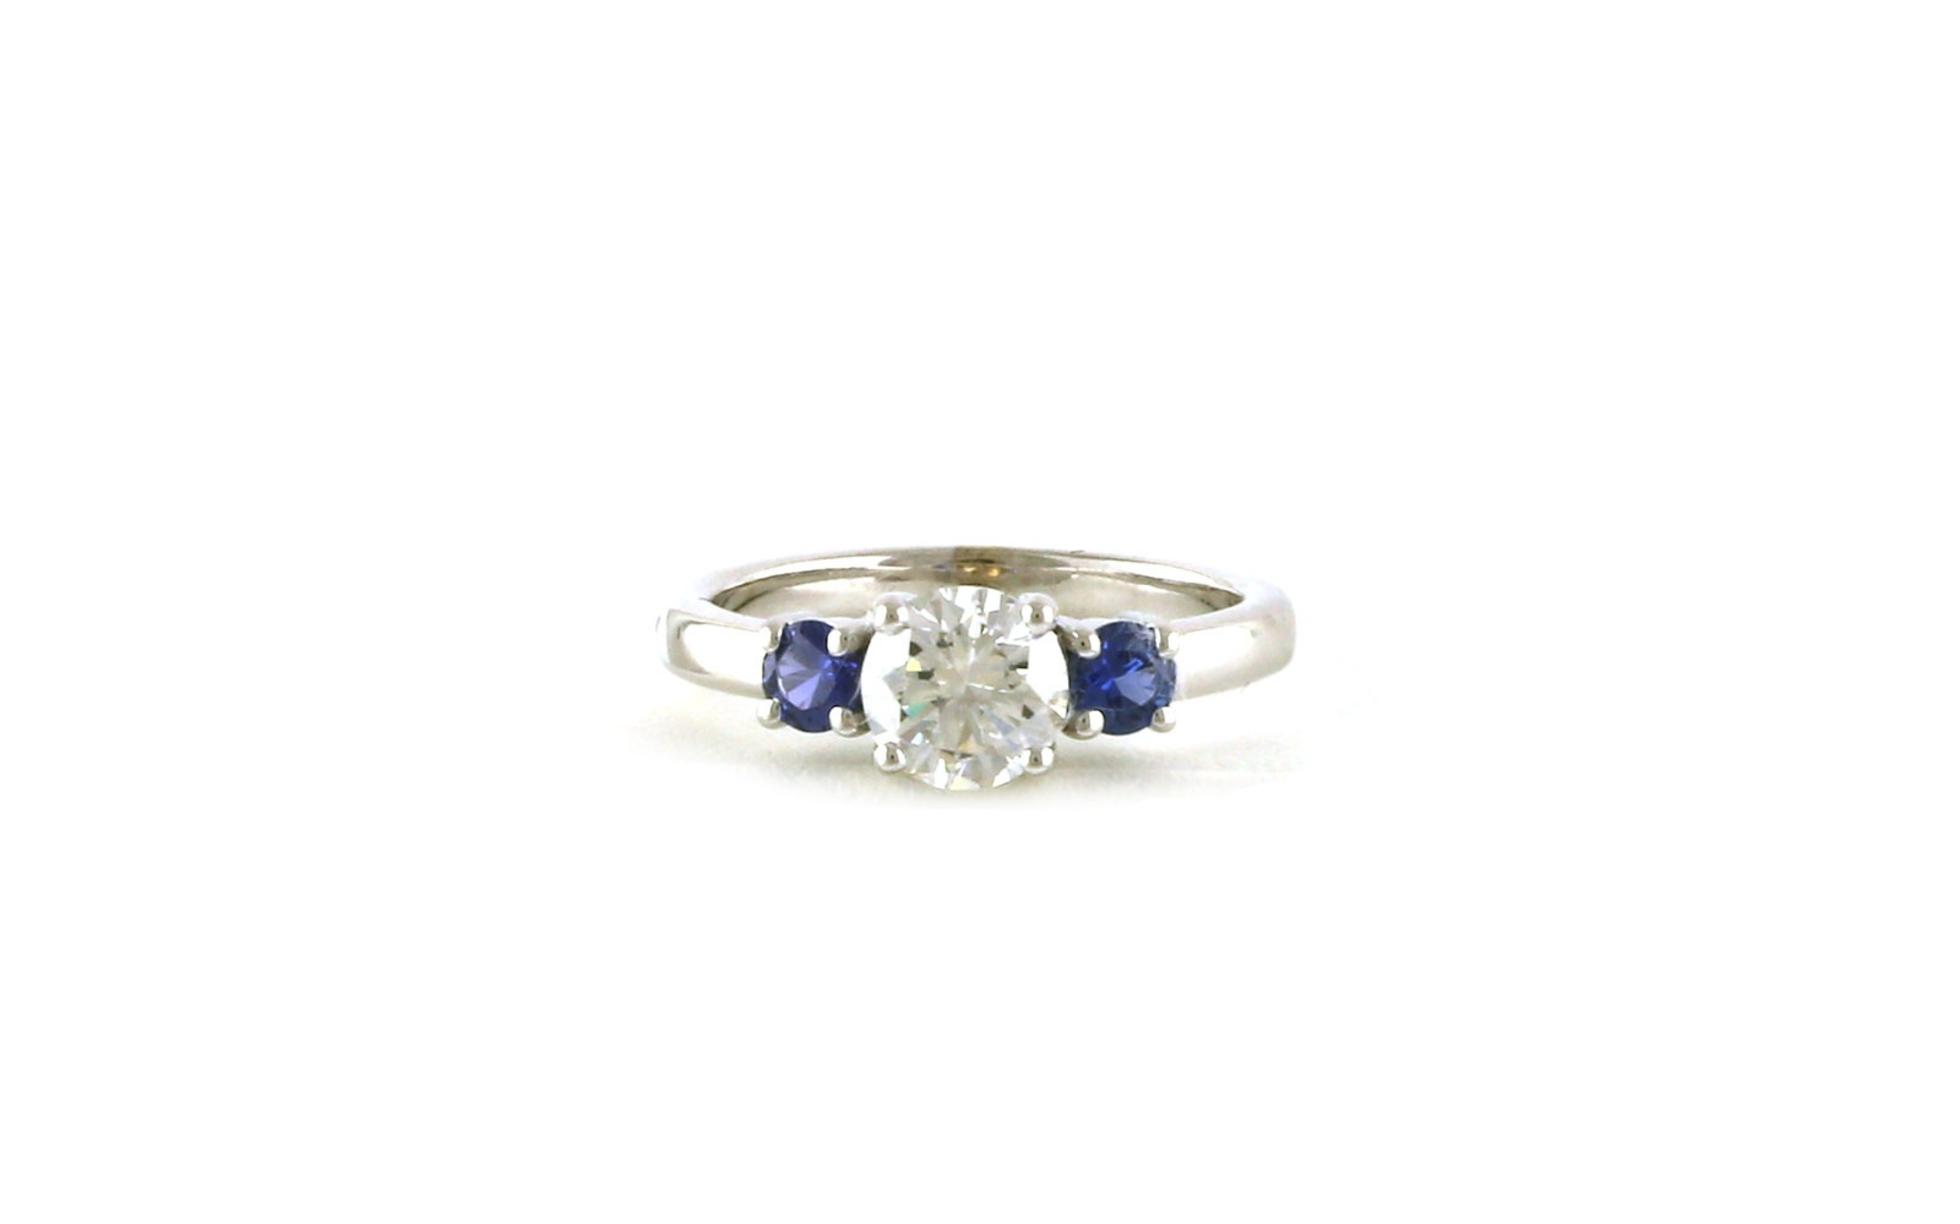 3-Stone Prong-set Diamond and Montana Yogo Sapphire Ring in White Gold (1.44cts TWT)